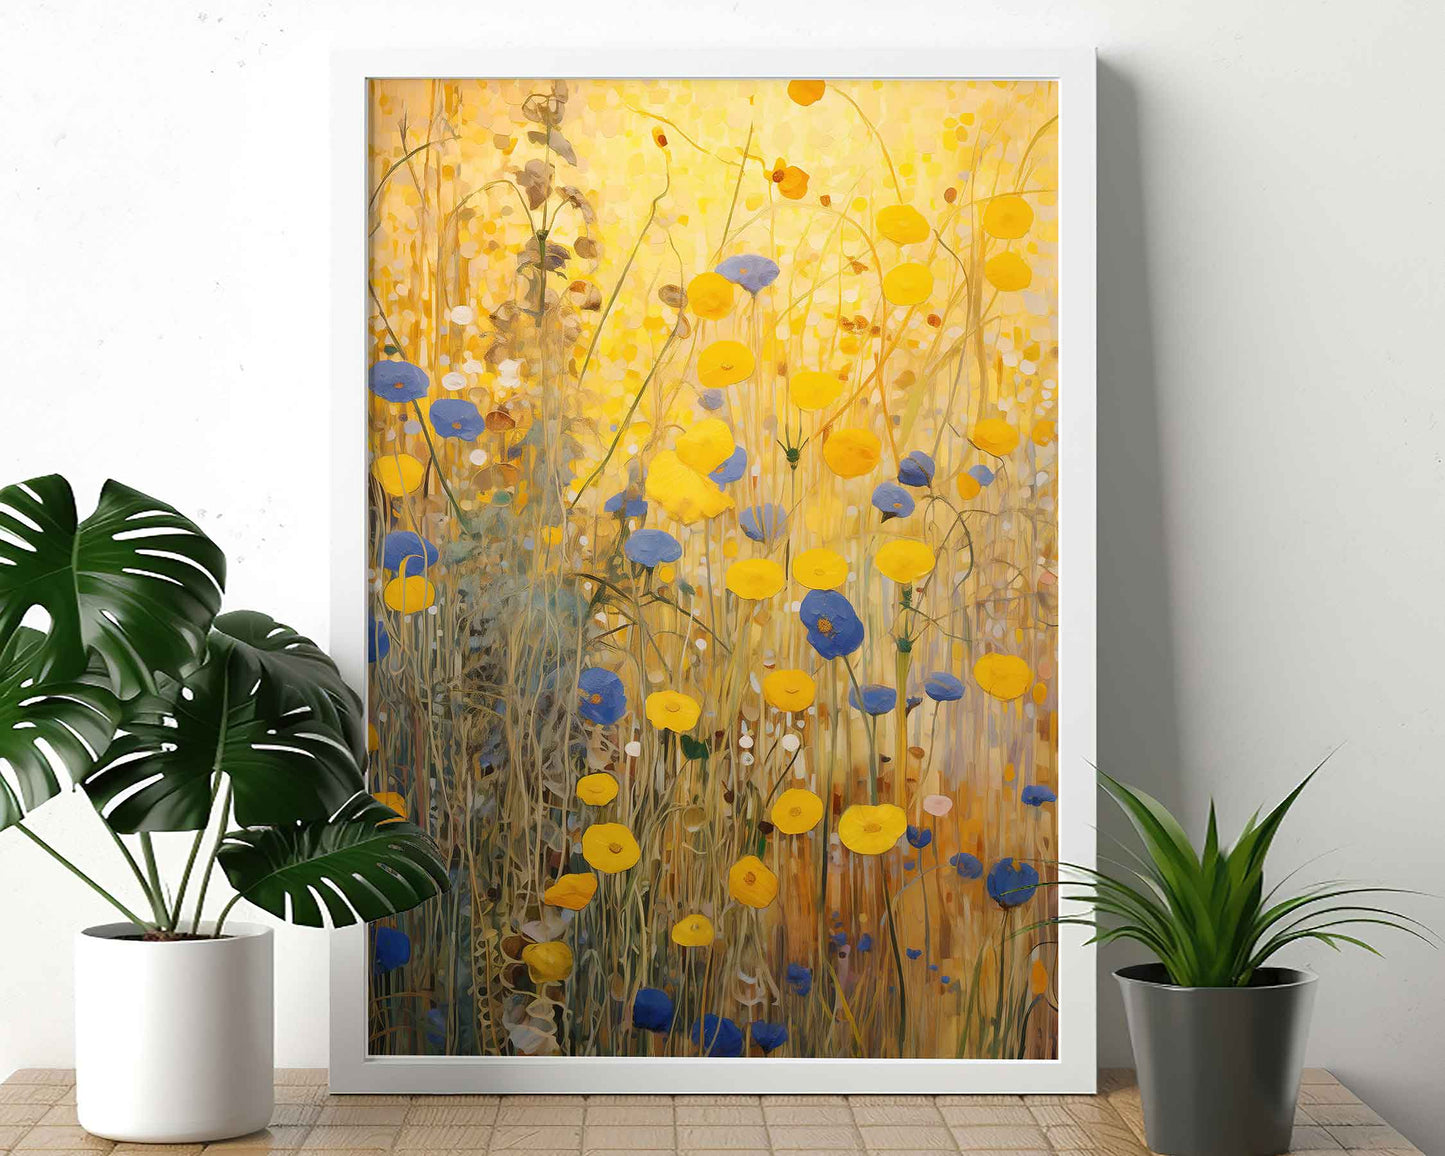 Framed Image of Gustav Klimt Style Yellow and Blue Flowers Wall Art Print Poster